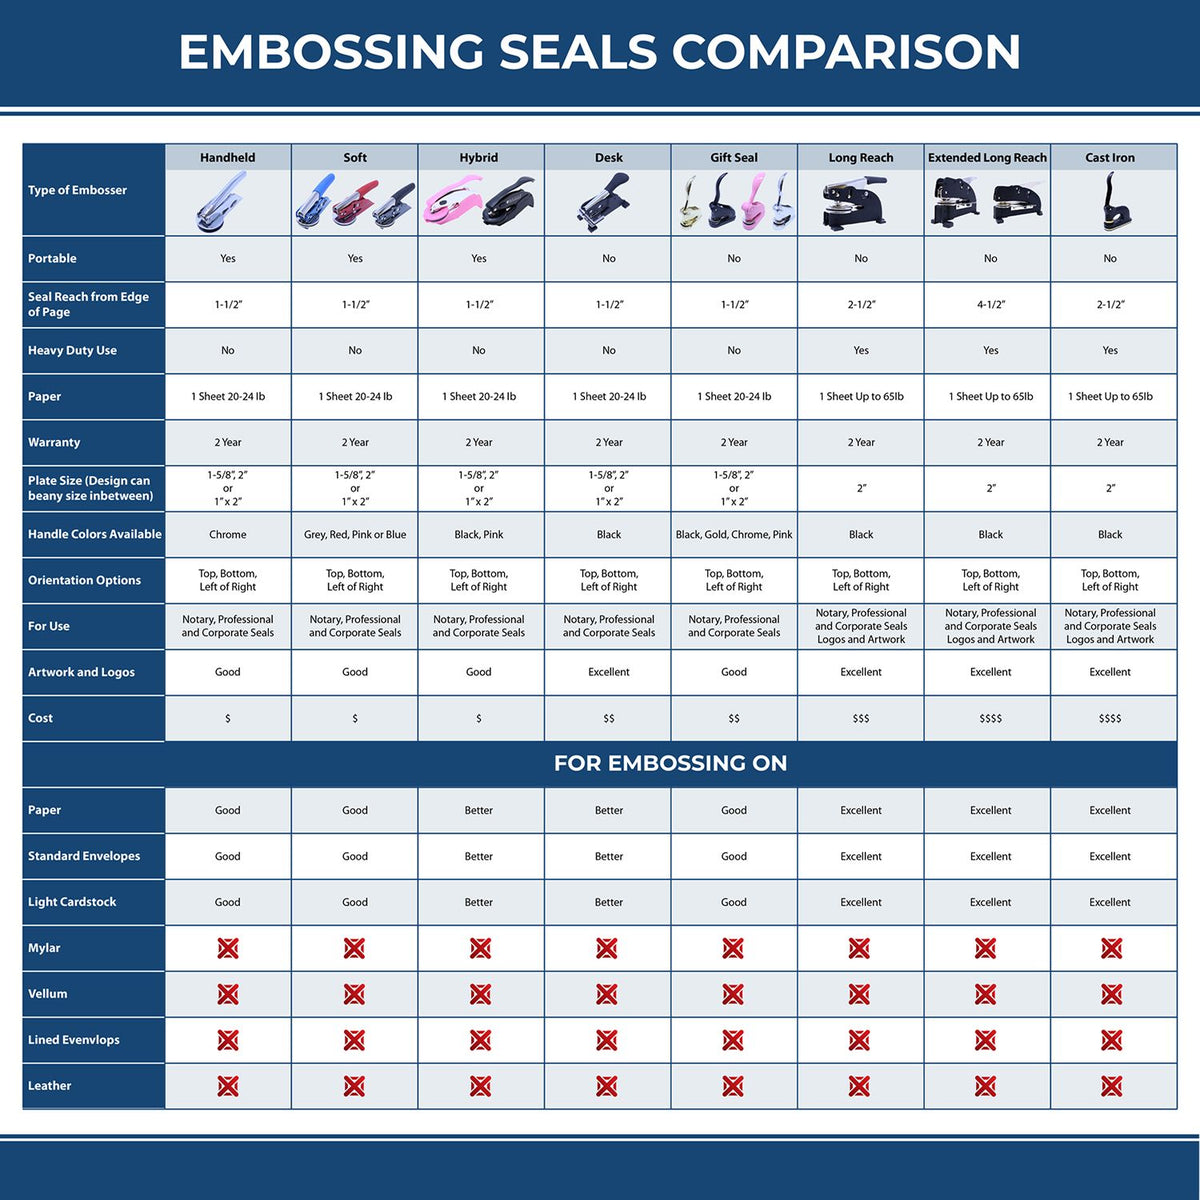 A comparison chart for the different types of mount models available for the Handheld West Virginia Architect Seal Embosser.